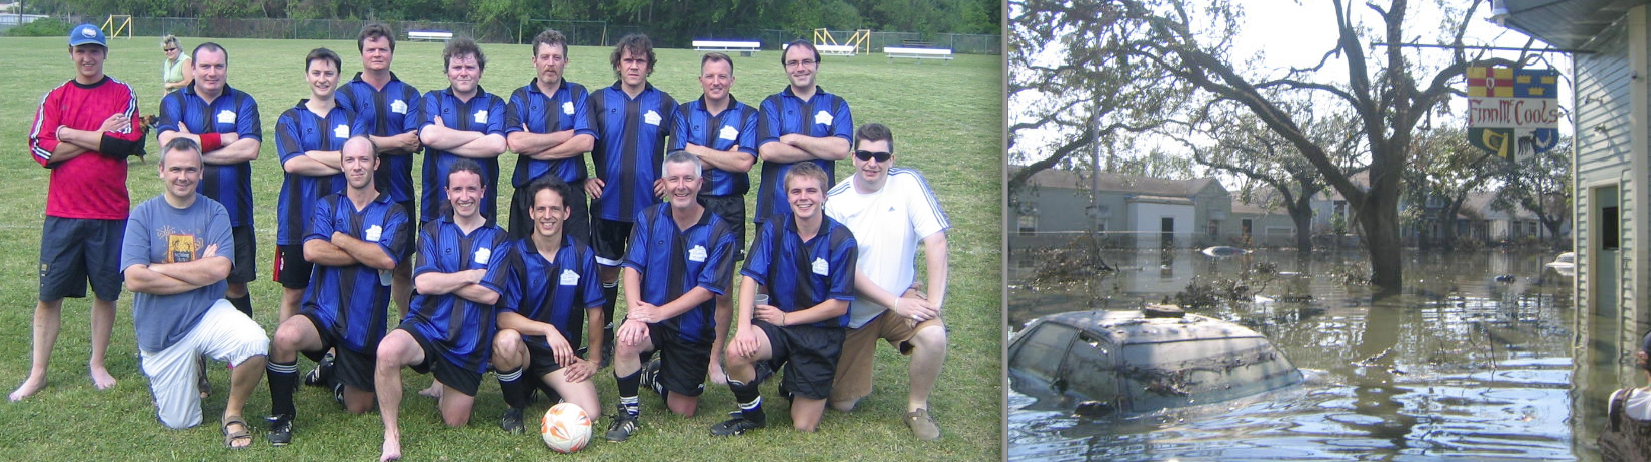 Finn McCool’s Football Club is still going strong – author Stephen Rea is front row, third from left; right, Finn McCool’s bar under water after Hurricane Katrina struck in 2005 